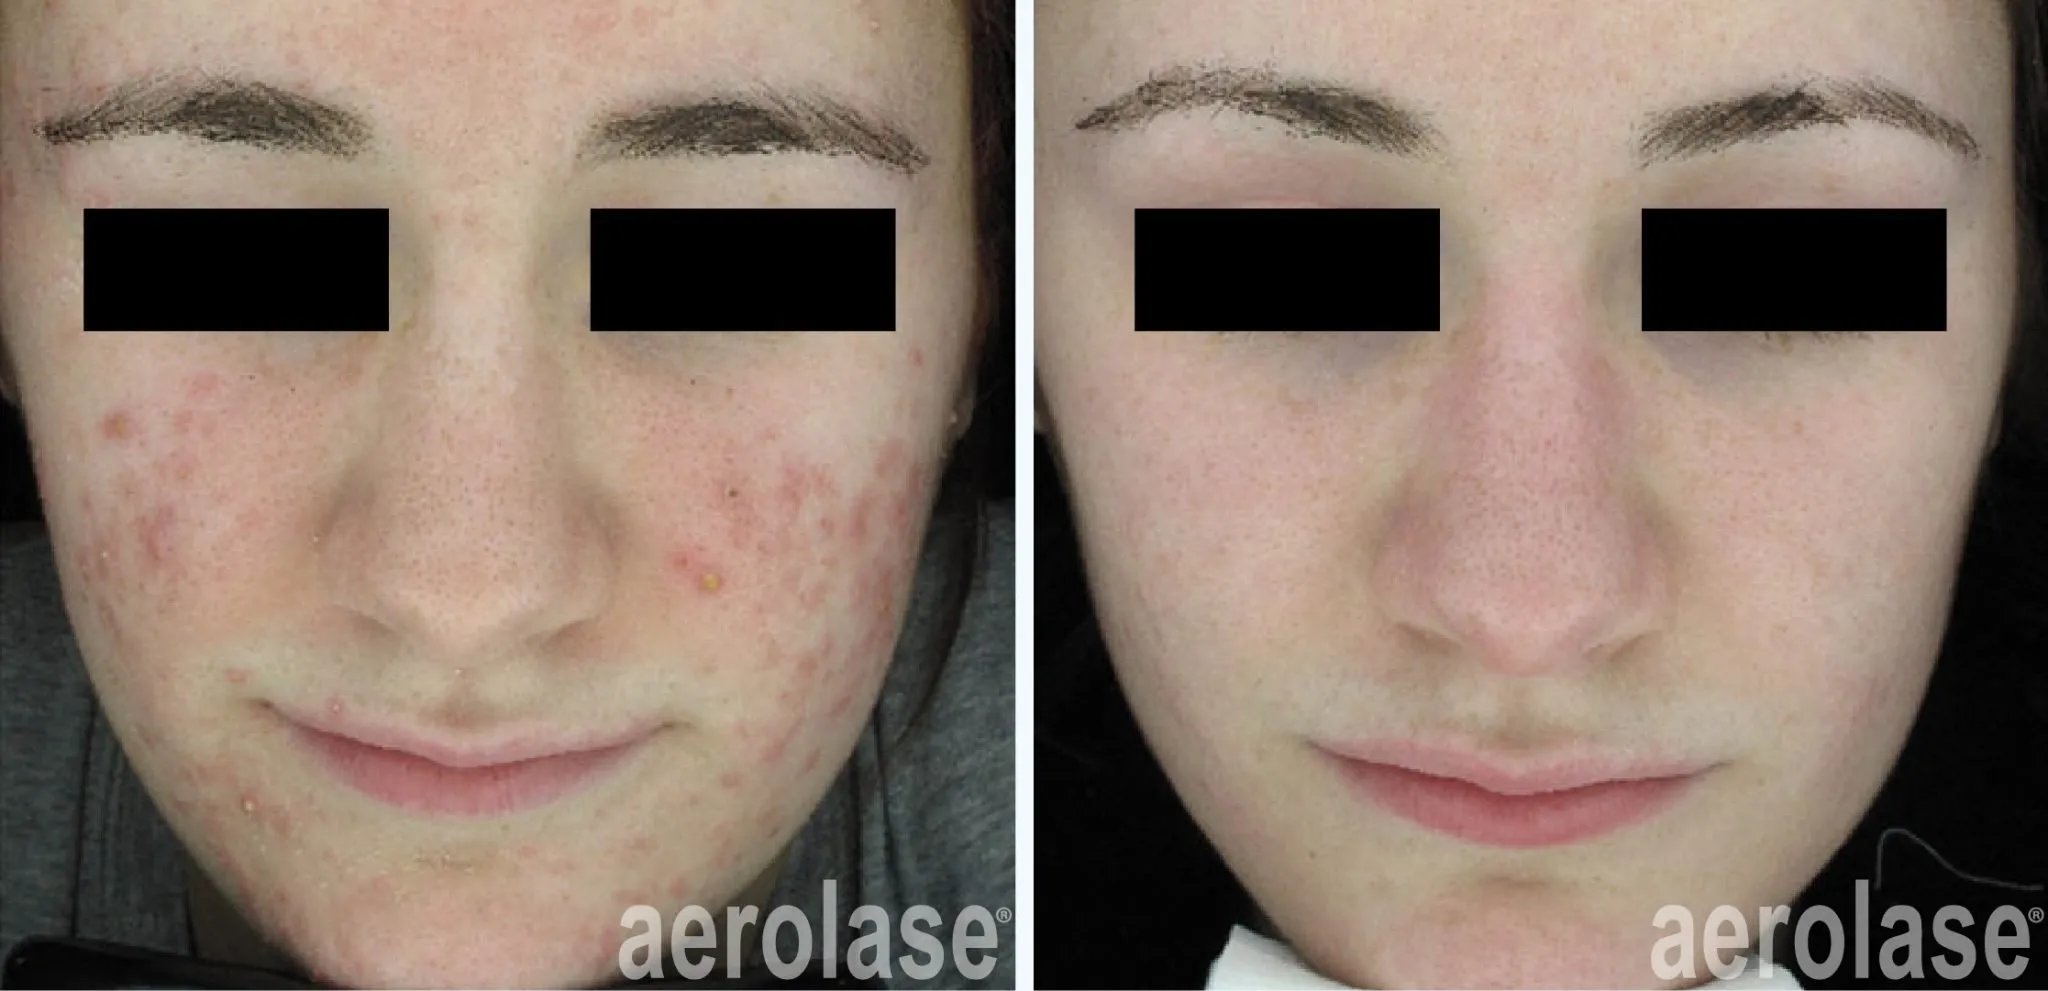 acne-cheeks-david-goldberg-before-and-after